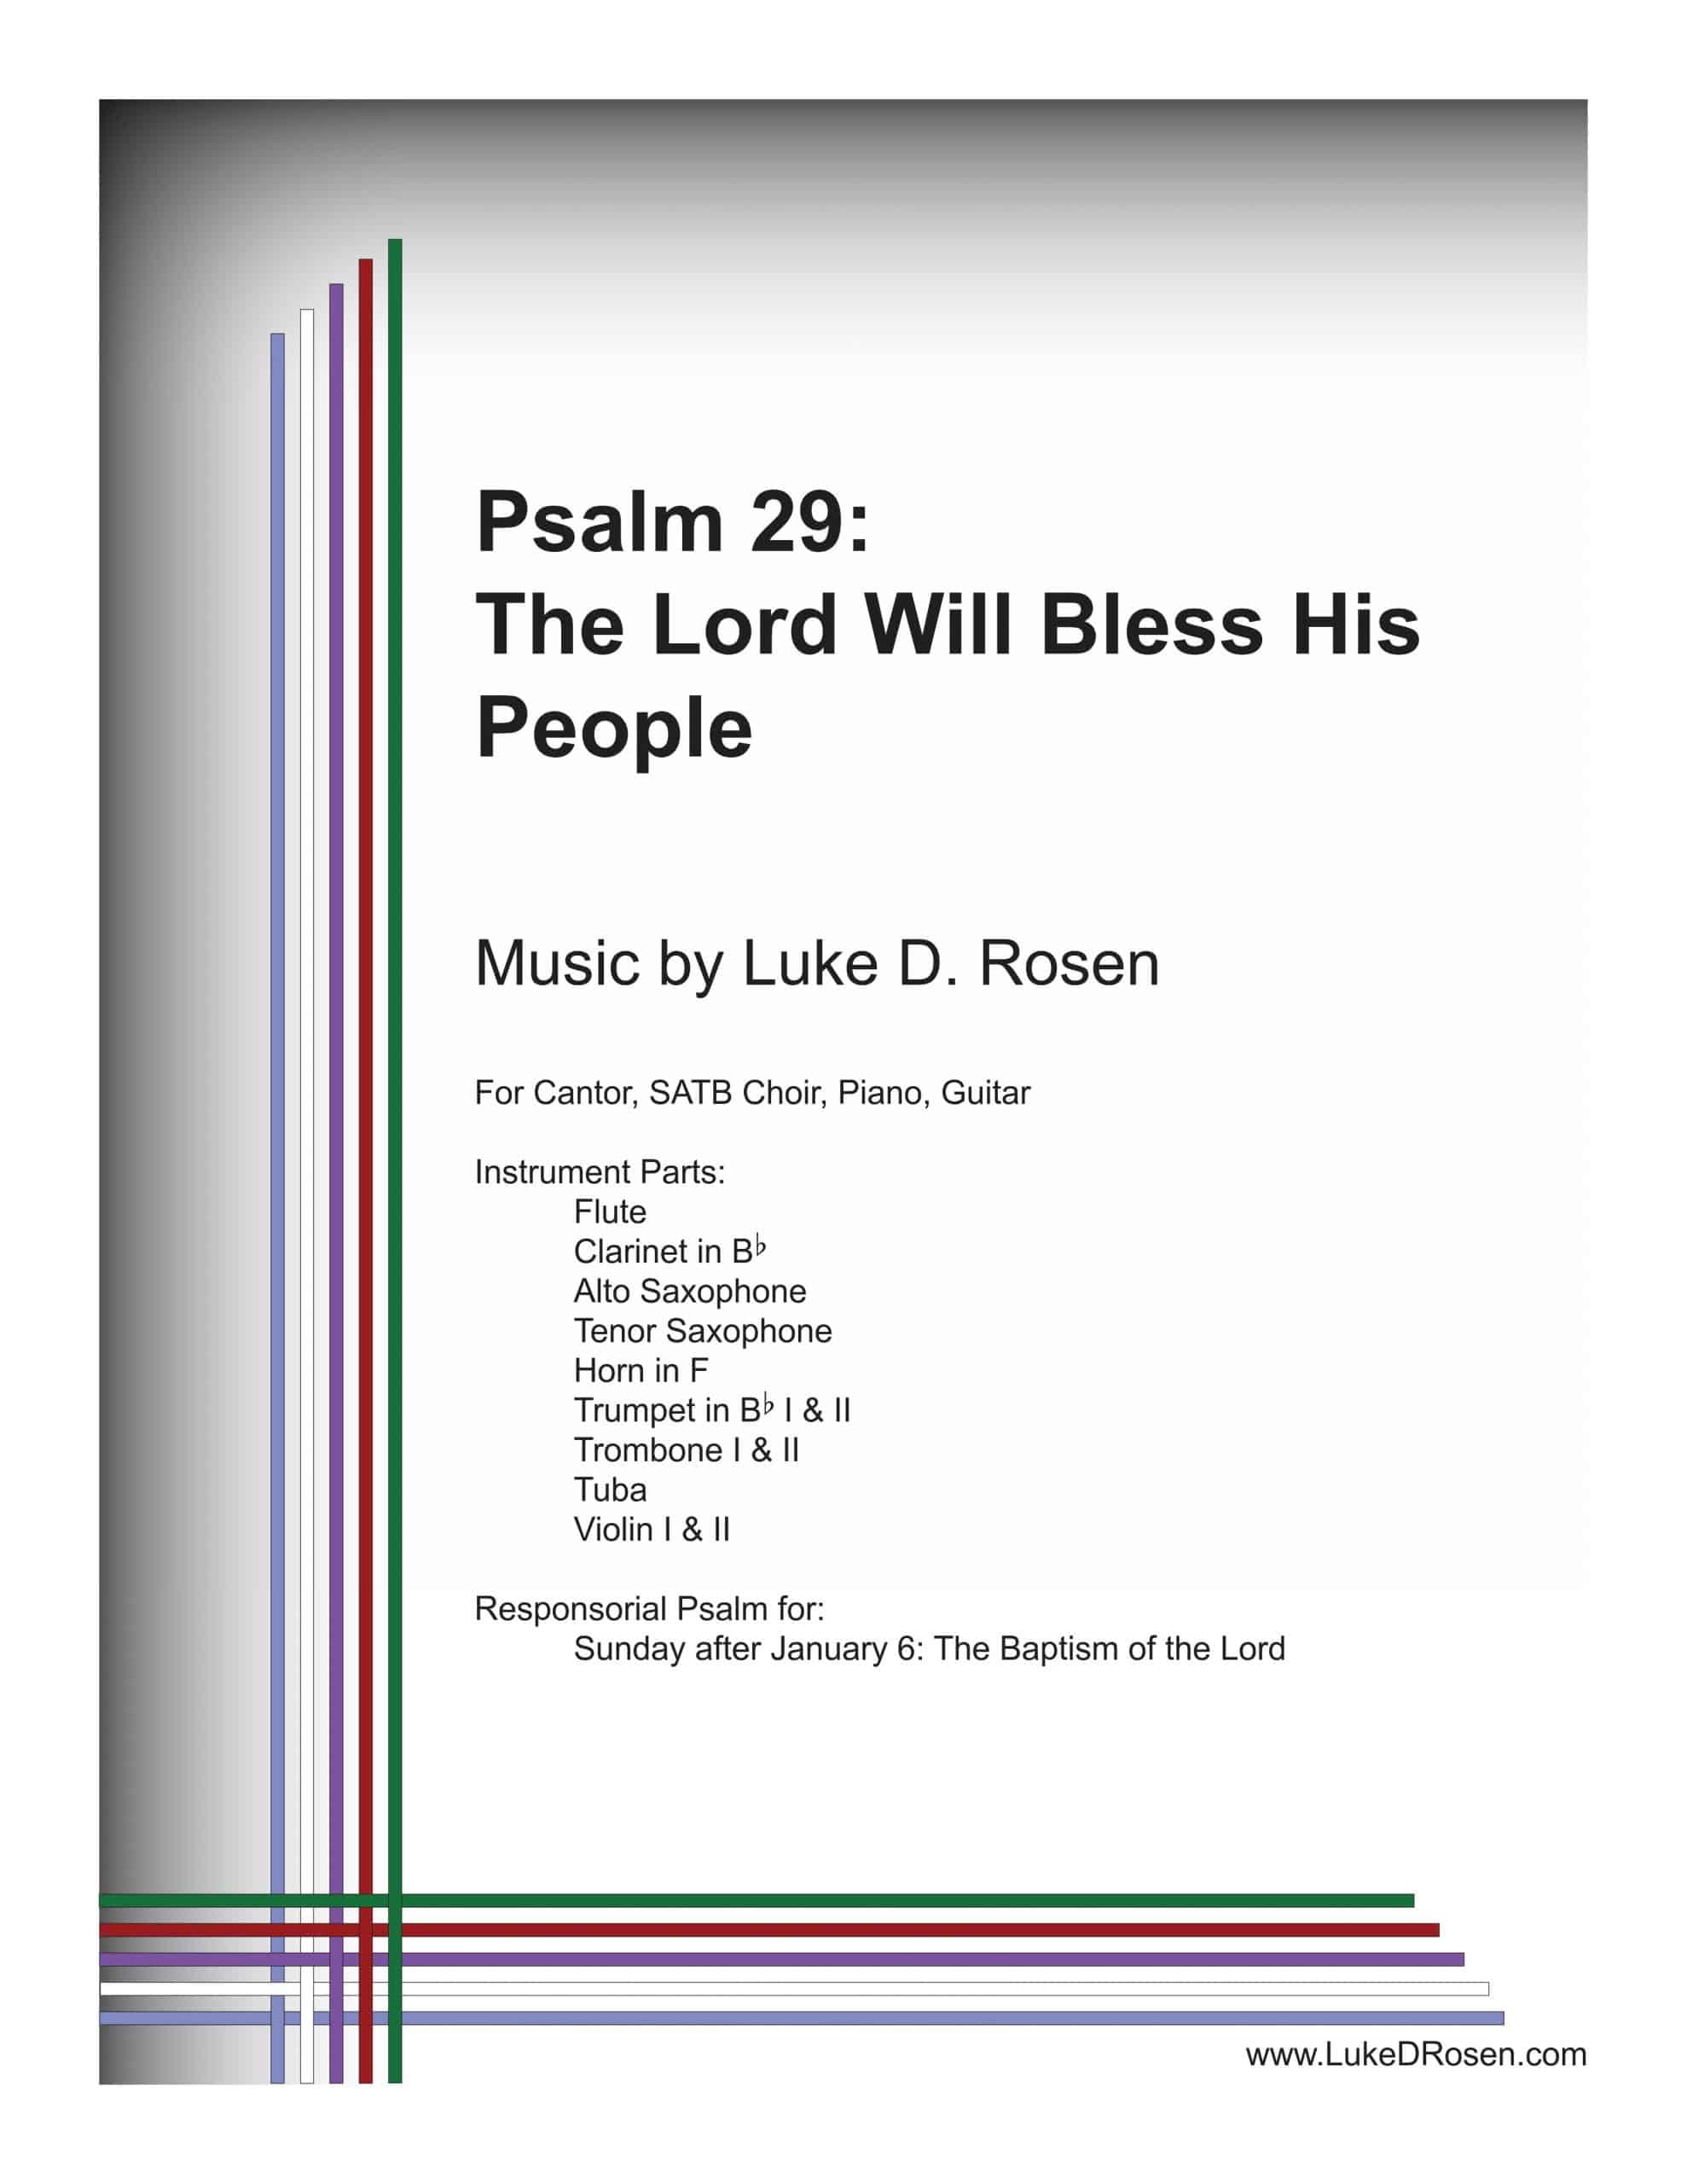 Psalm 29 – The Lord Will Bless His People (Rosen)